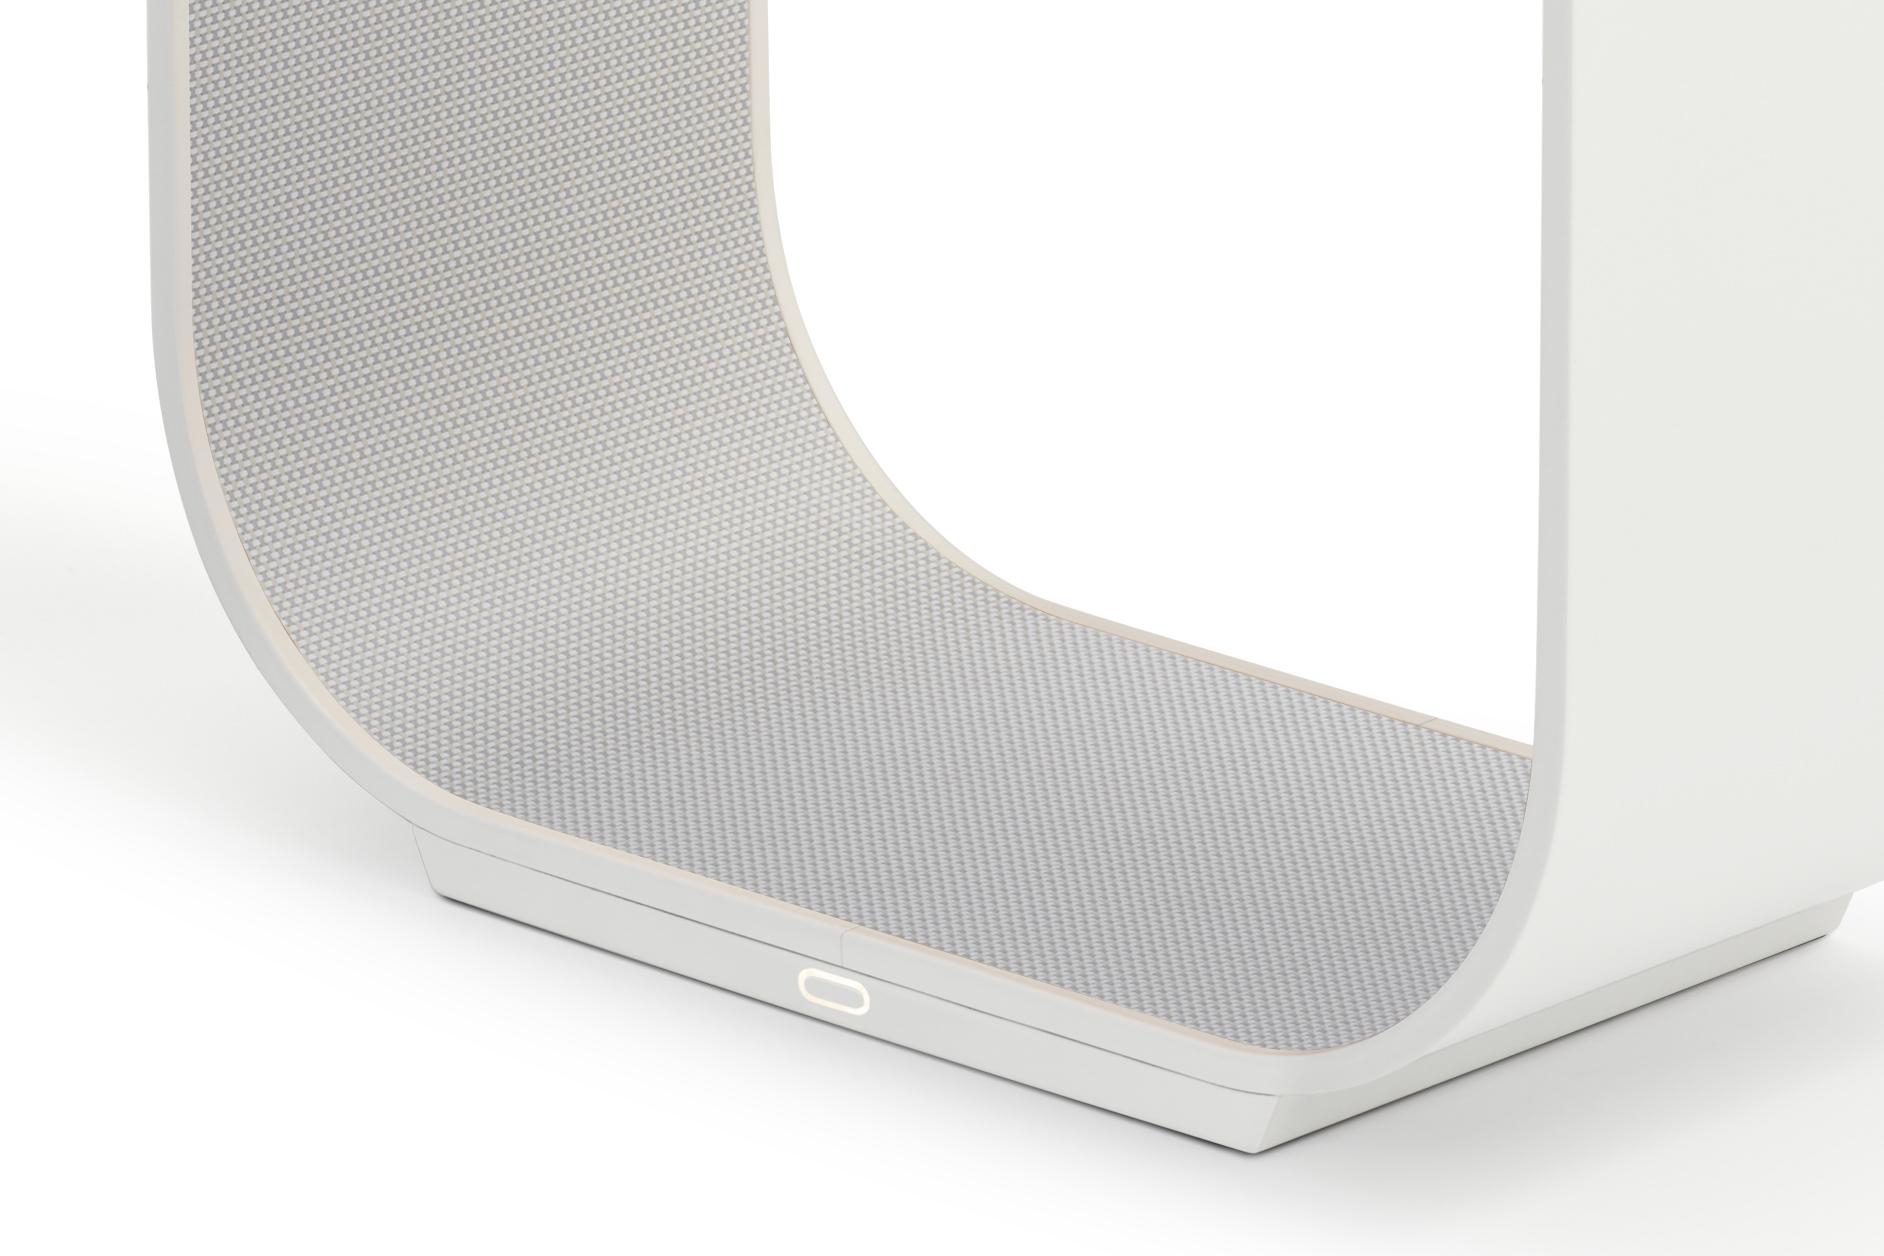 Contour’s revealing and elegant open framed architecture captures warm LED illumination within a remarkably slender extruded aluminum structure. Intelligent and highly efficient, Contour’s minimalist design has been refined to the bare essentials,